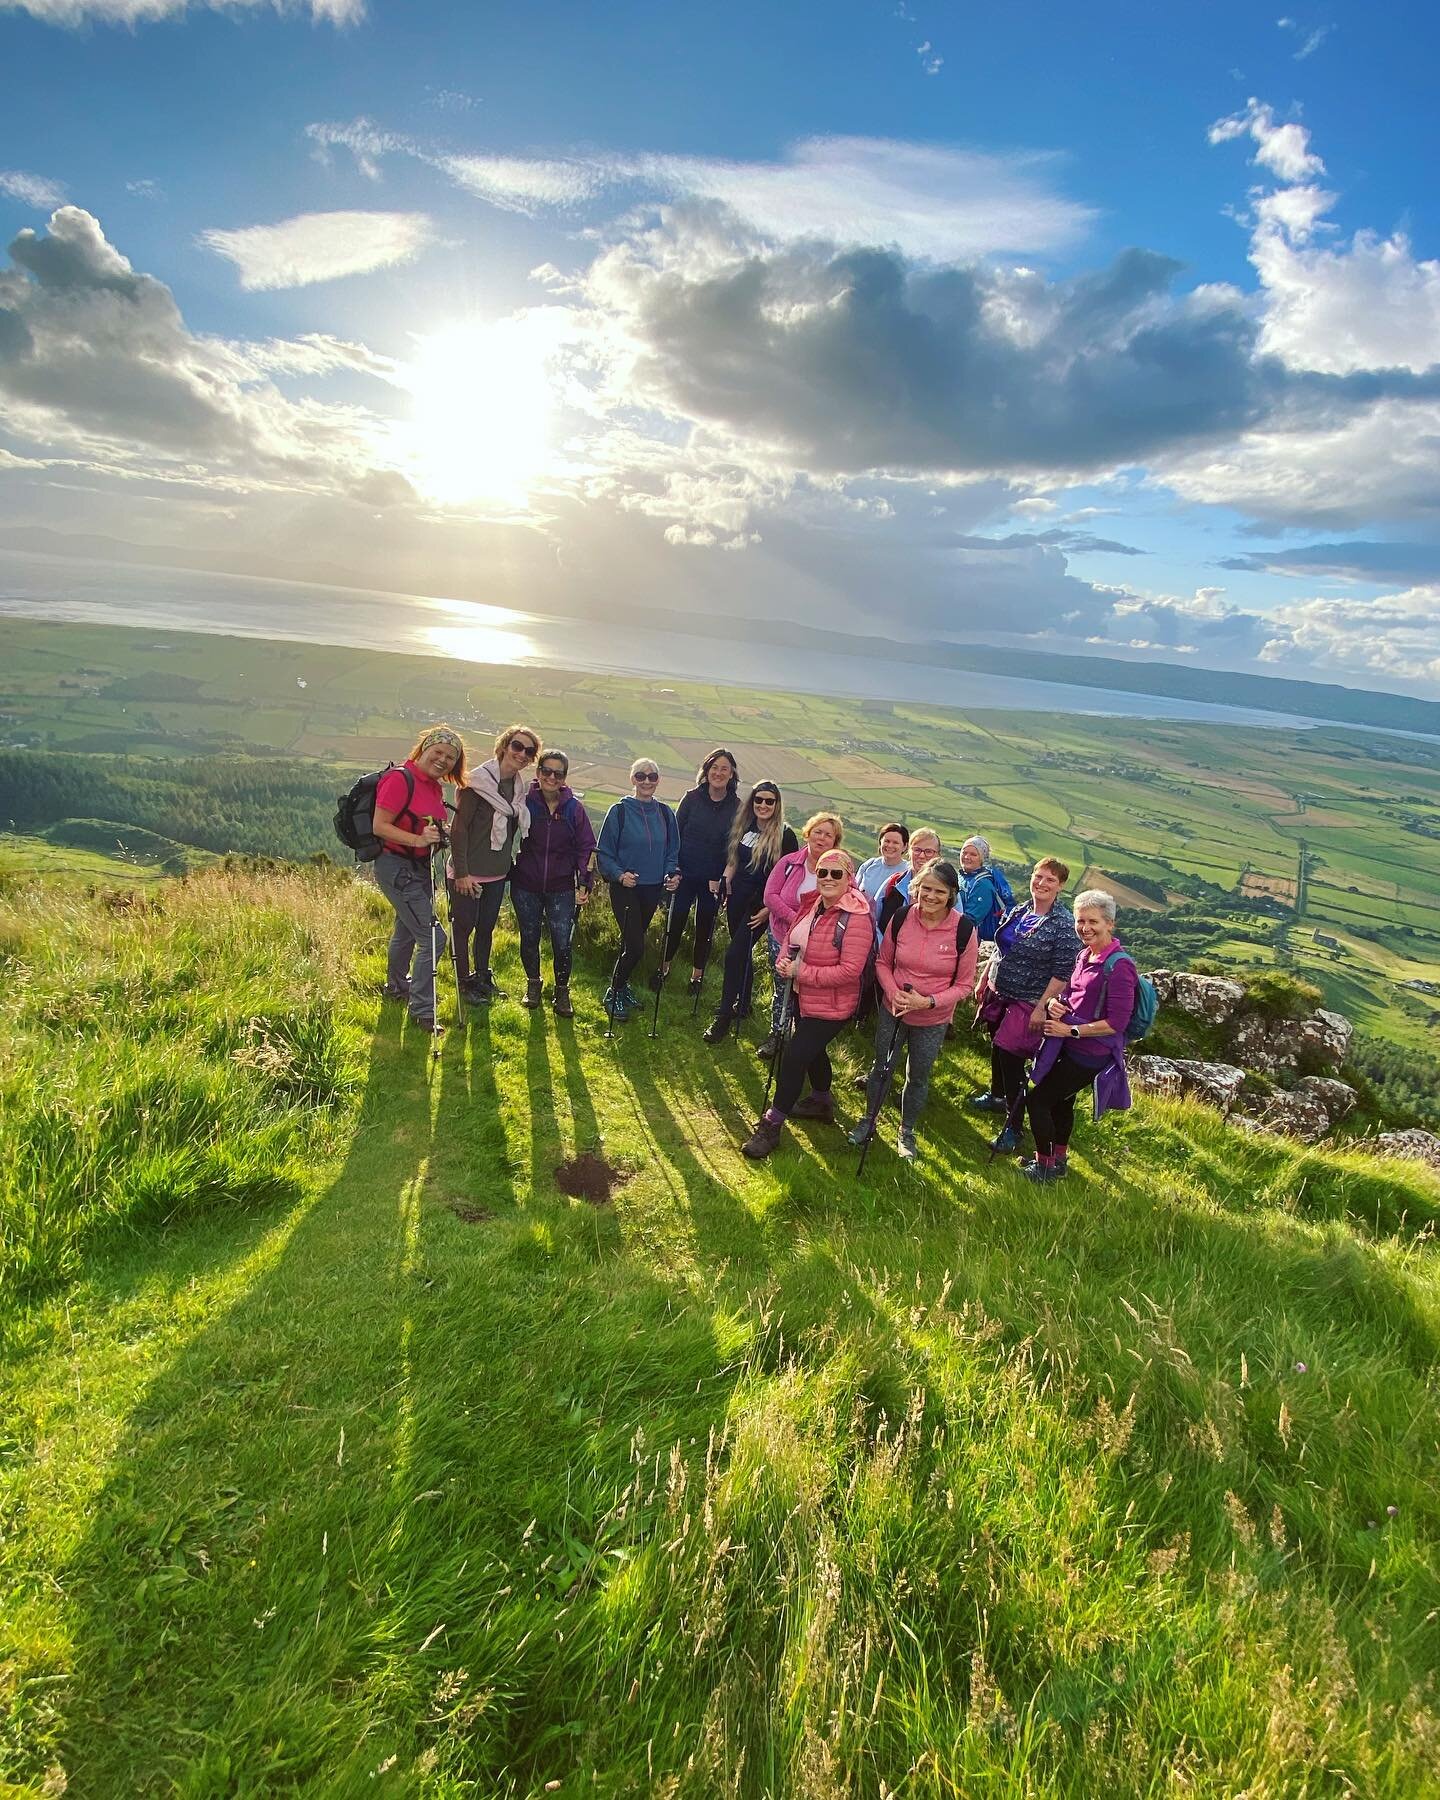 &ldquo;Sunsets are proof that no matter what happens, every day can end beautifully.&rdquo;

And that is how our day ended with these awesome women who joined our Binevenagh Sunset Hike tonight. Beautiful!

And a special mention to the lovely Marijke